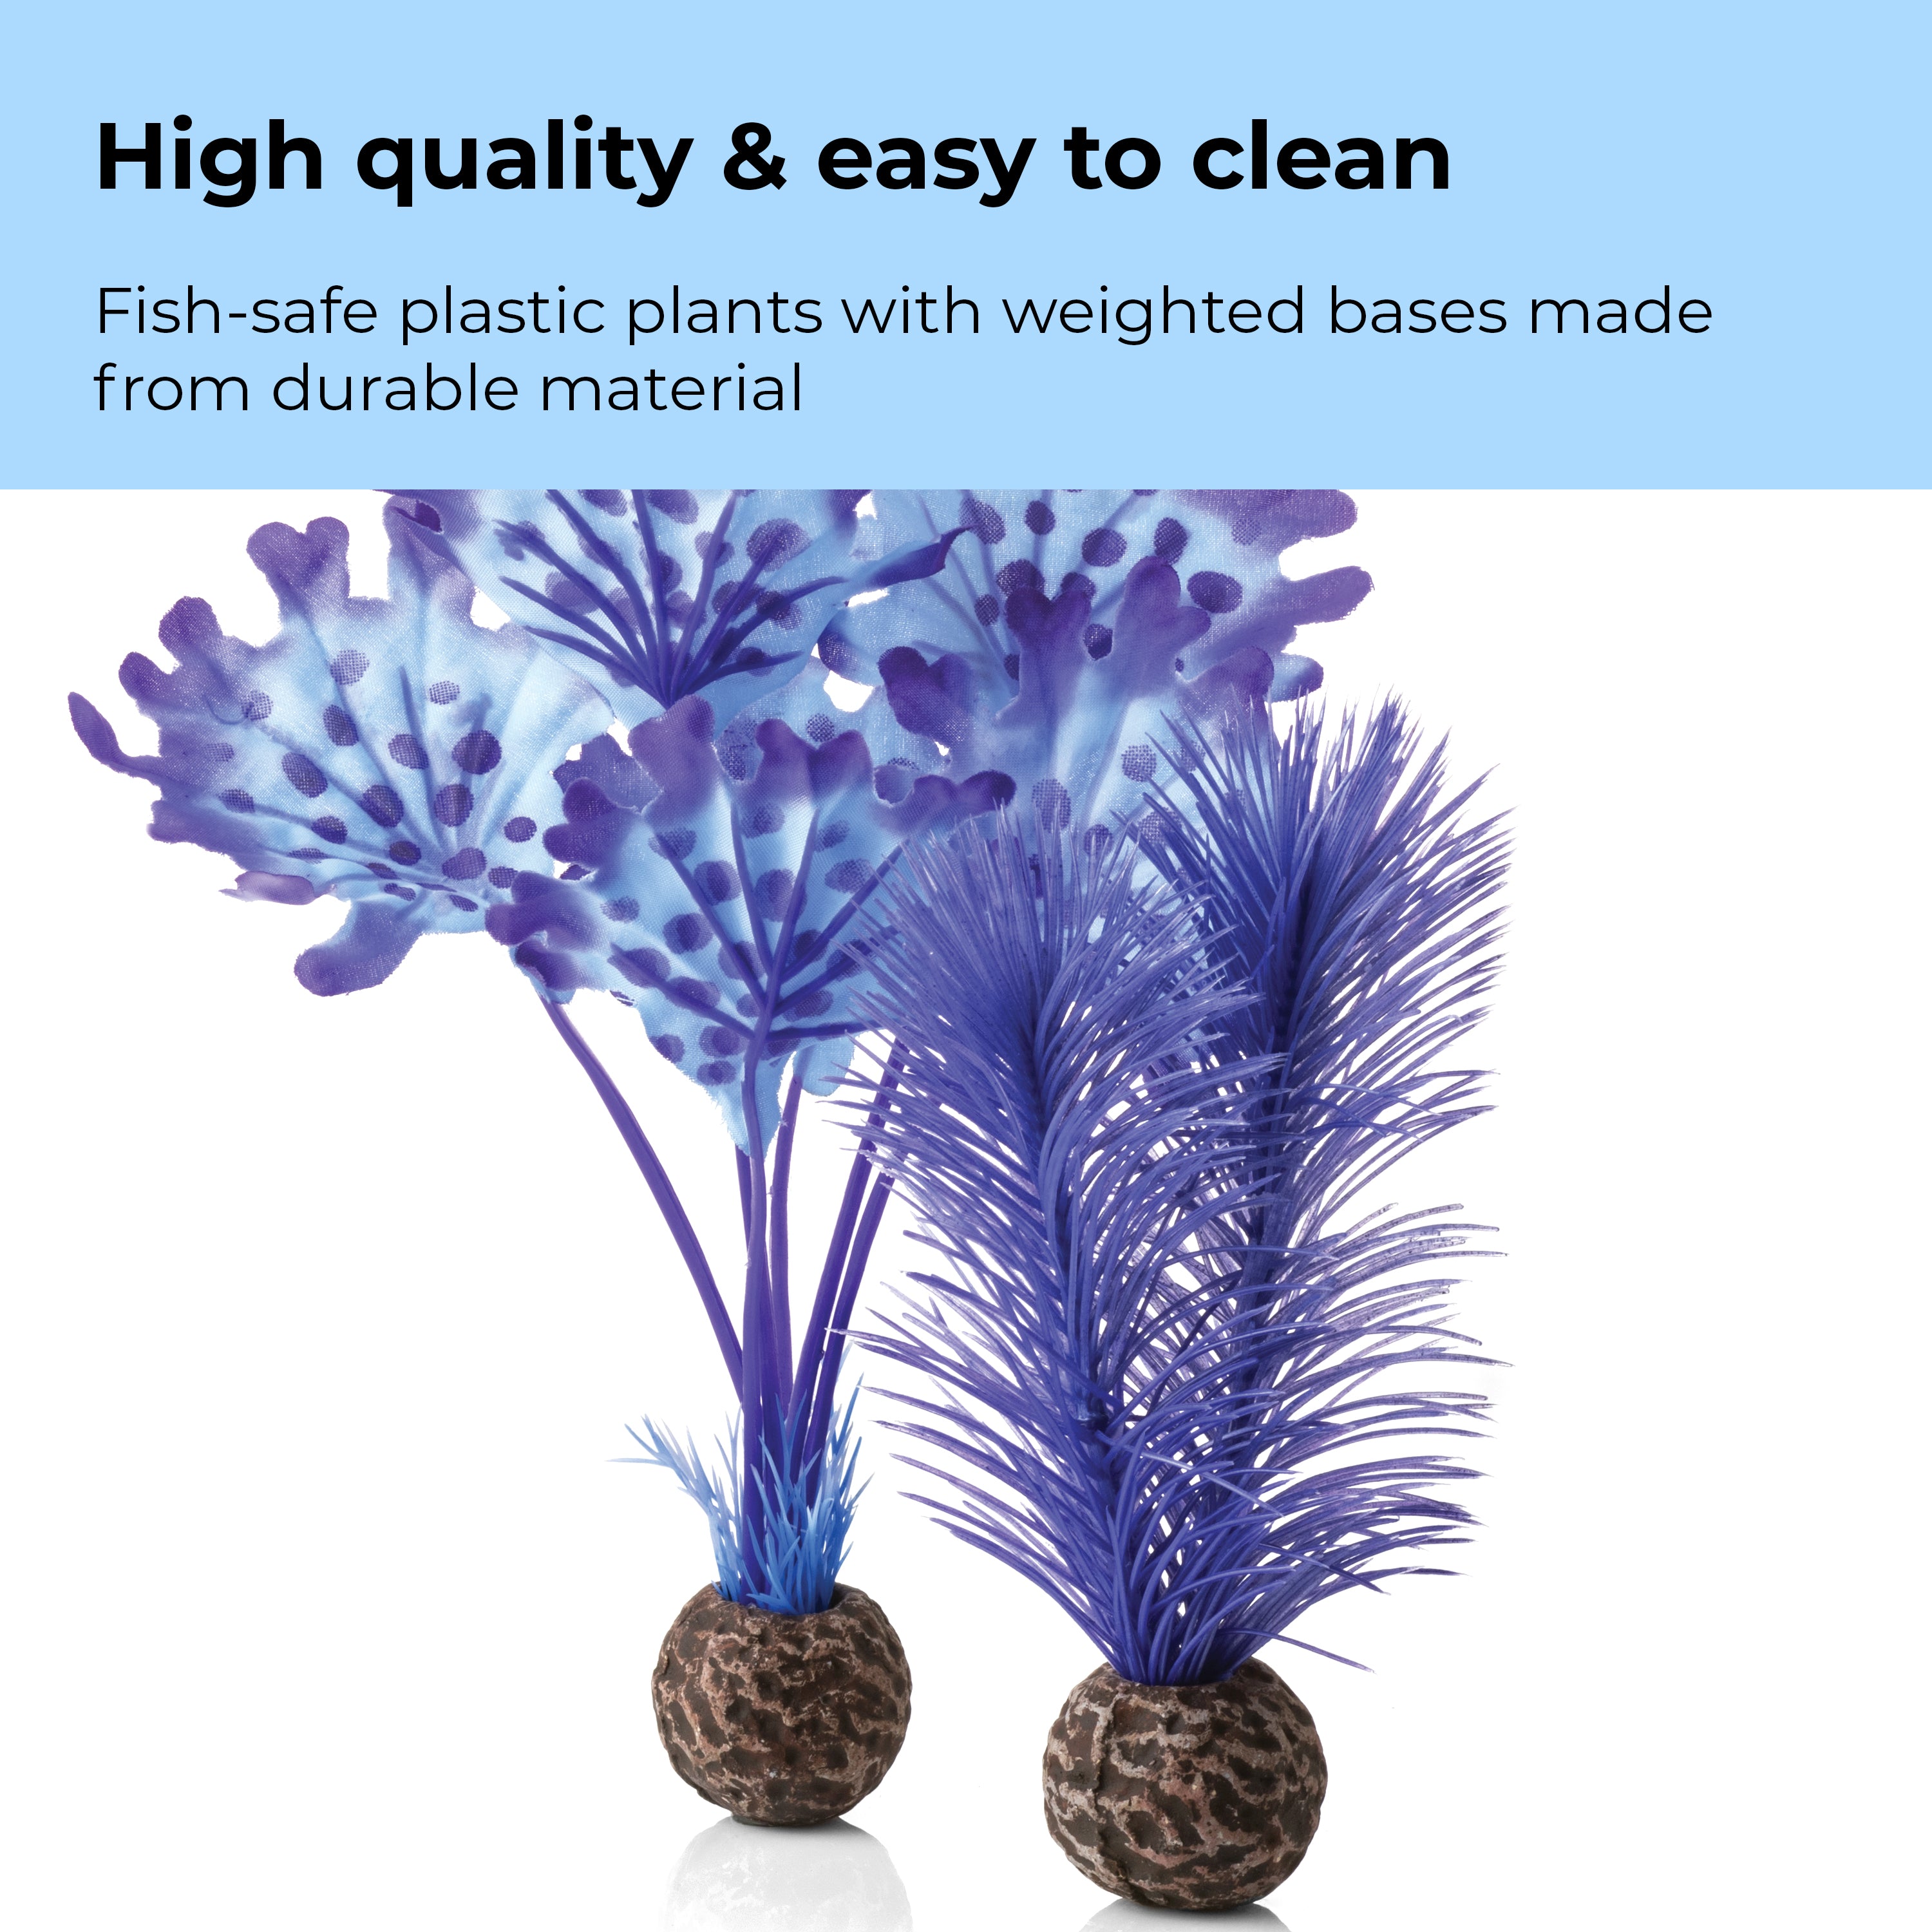 Small Kelp Plant Set - High quality & easy to clean